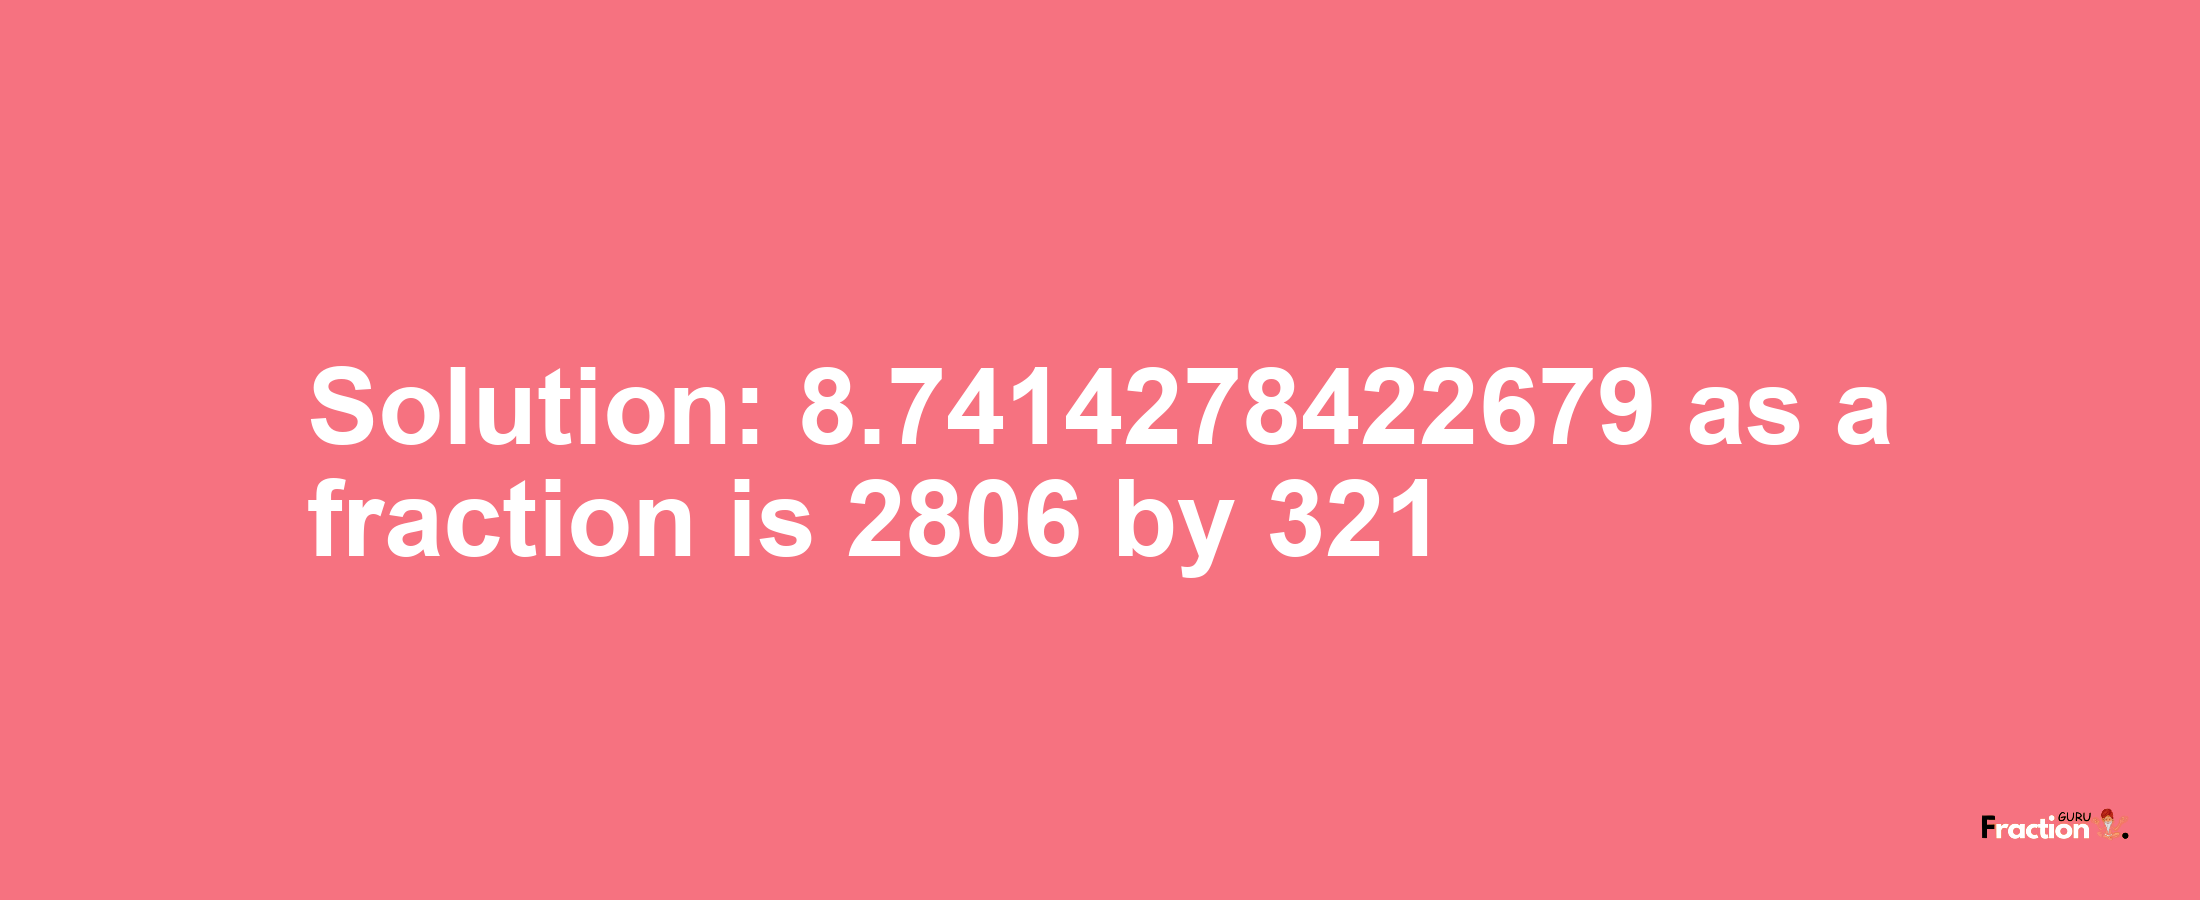 Solution:8.7414278422679 as a fraction is 2806/321